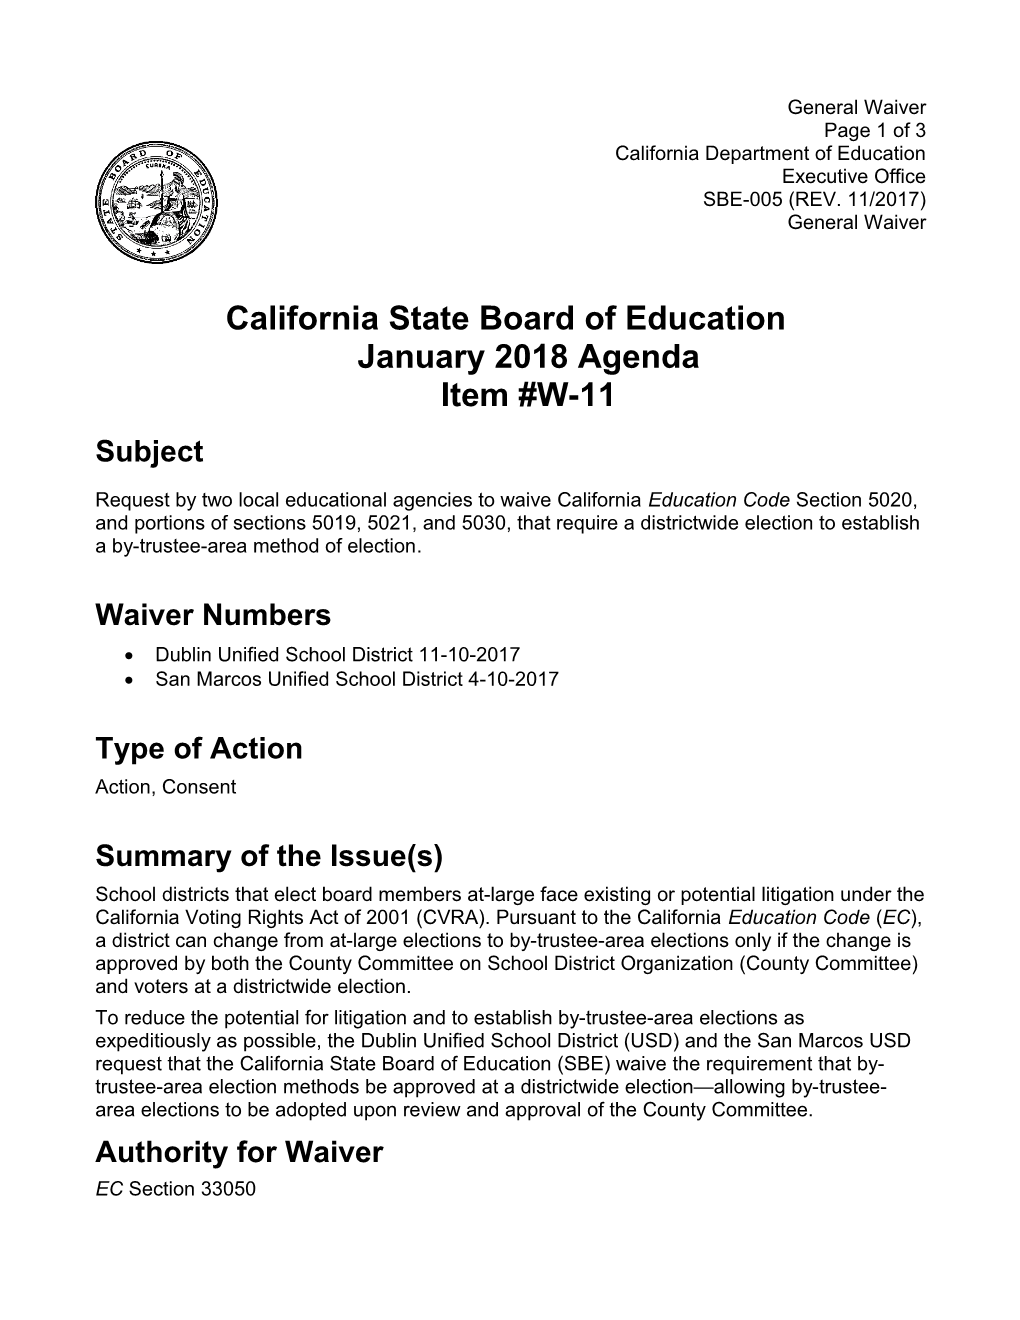 January 2018 Waiver Item W-11 - Meeting Agendas (CA State Board of Education)